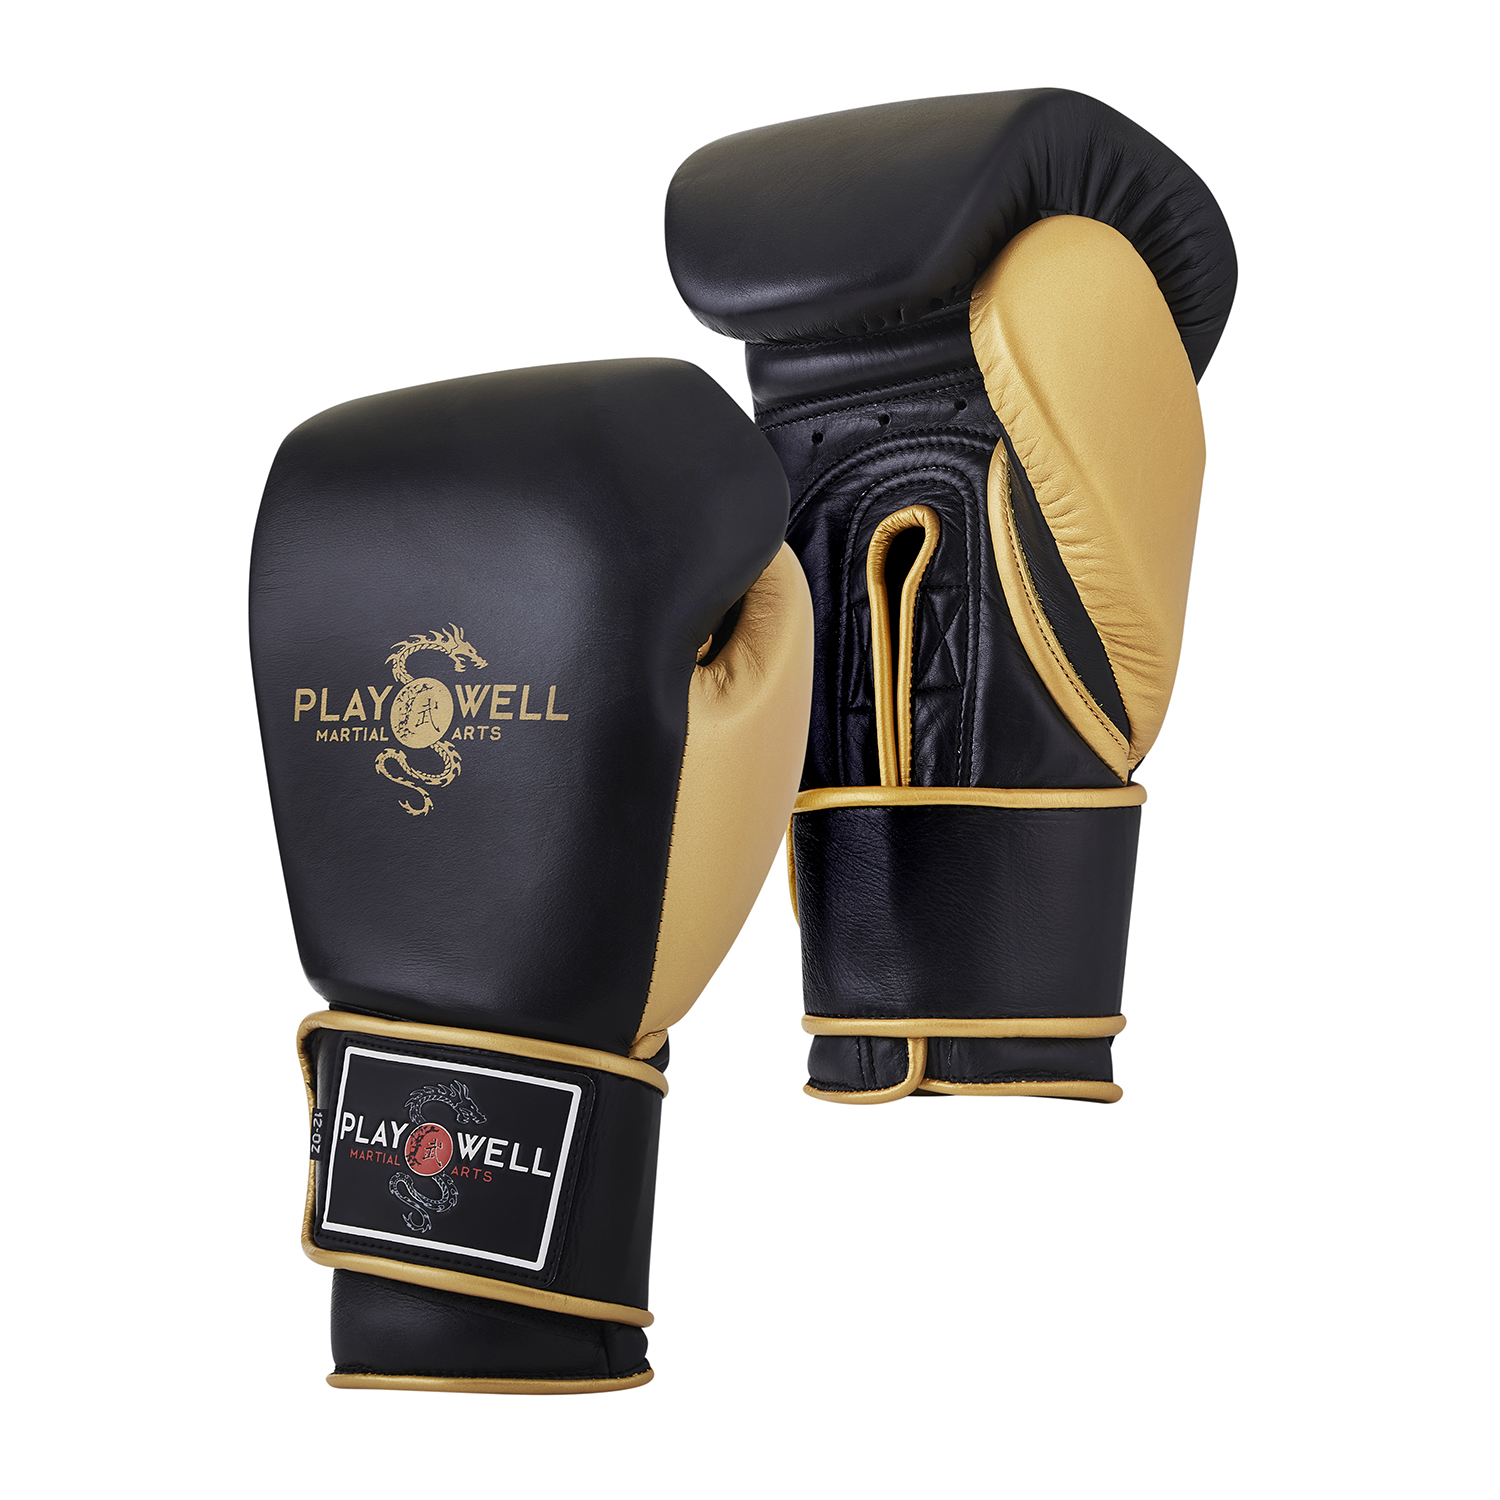 Playwell Premium "Champion" Leather Boxing Sparring Gloves - Click Image to Close